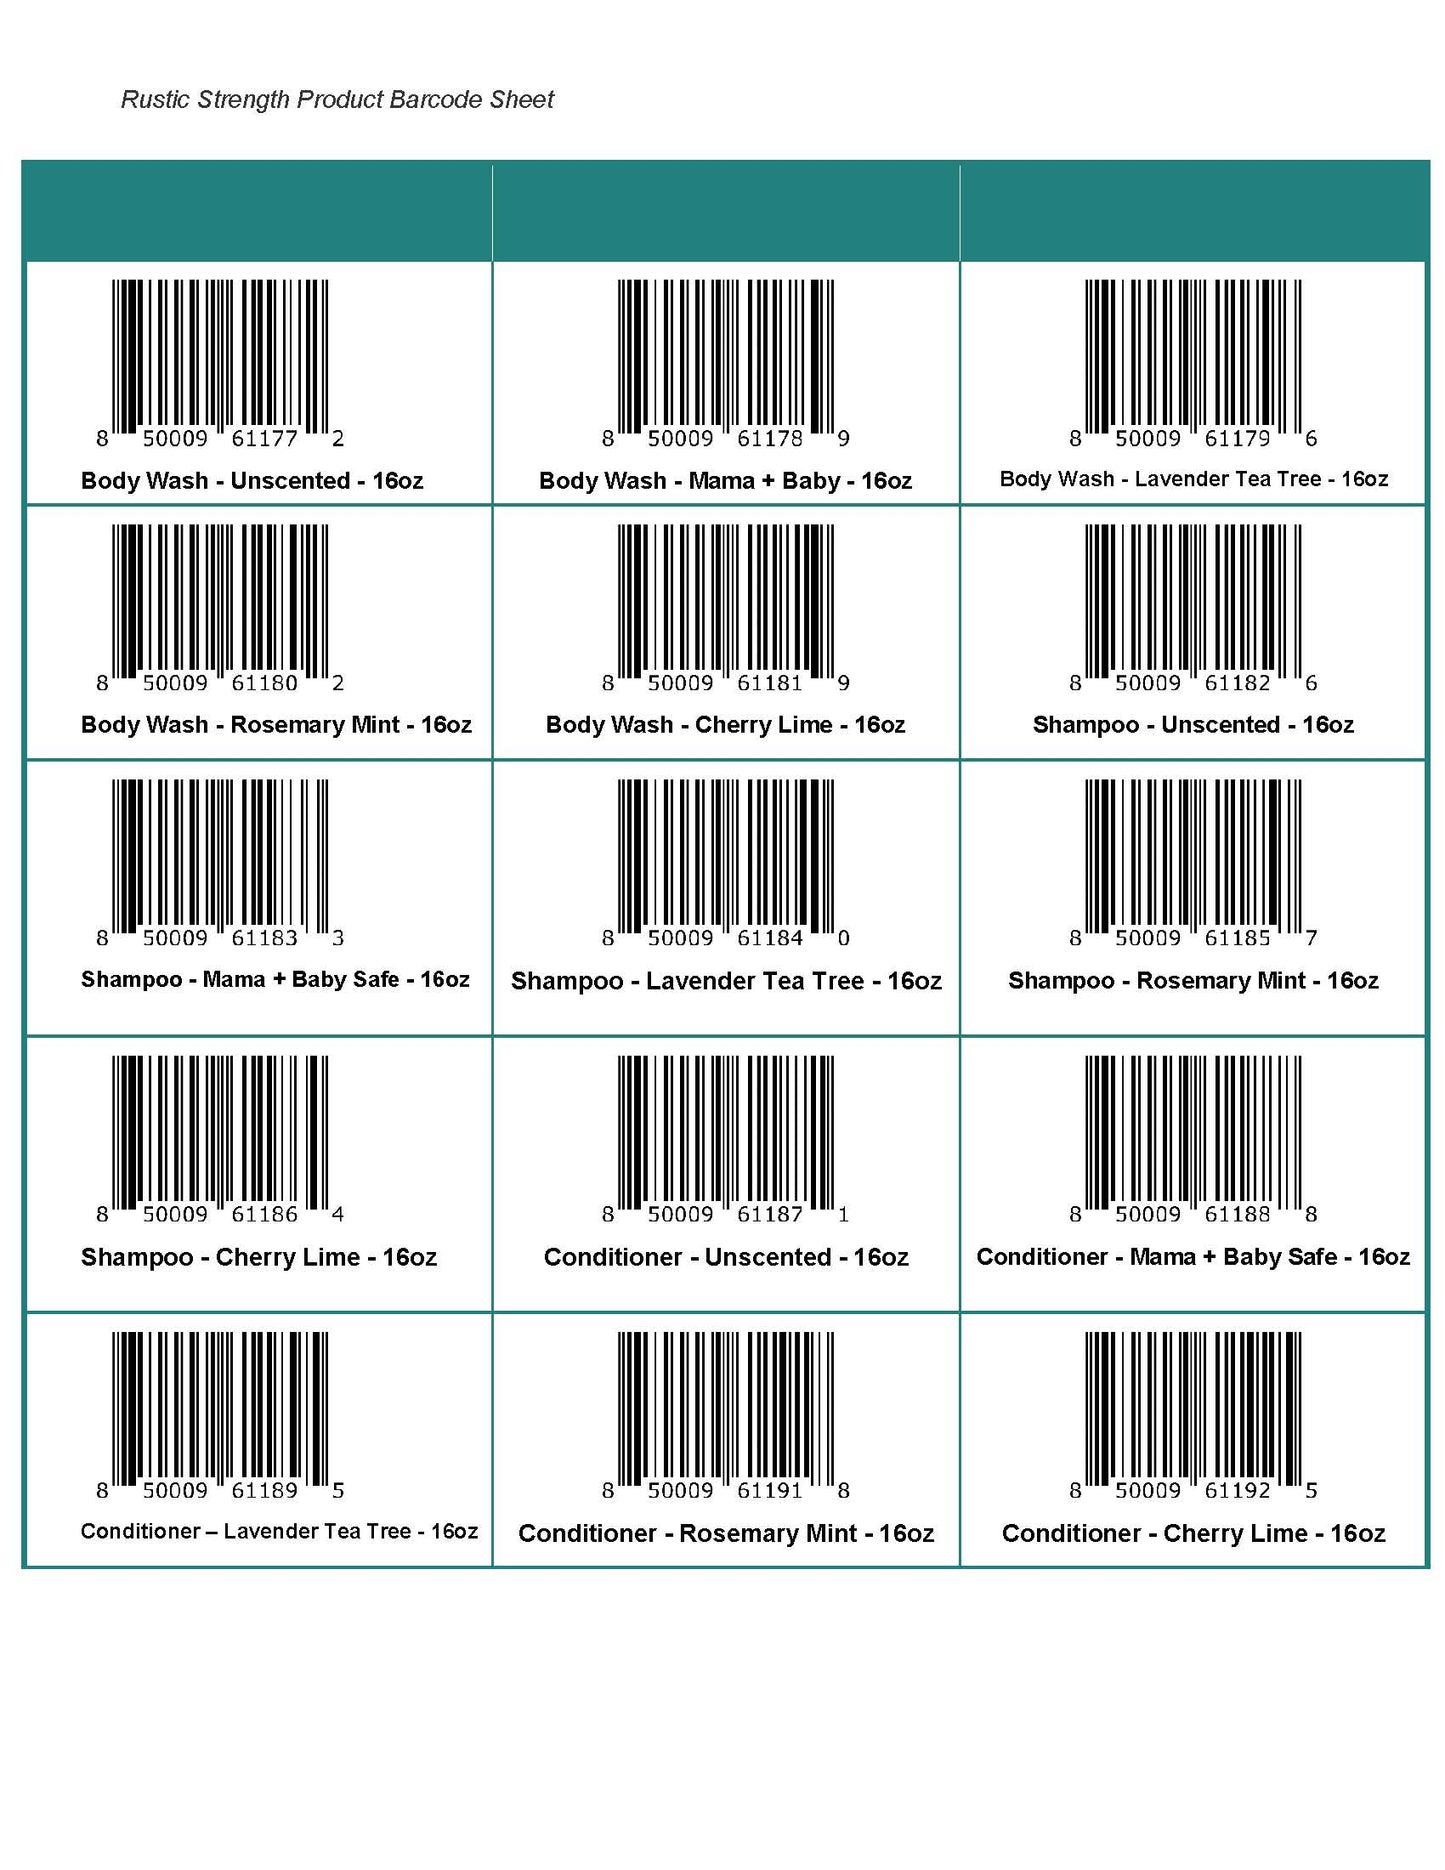 Barcodes for Retail Ready Items